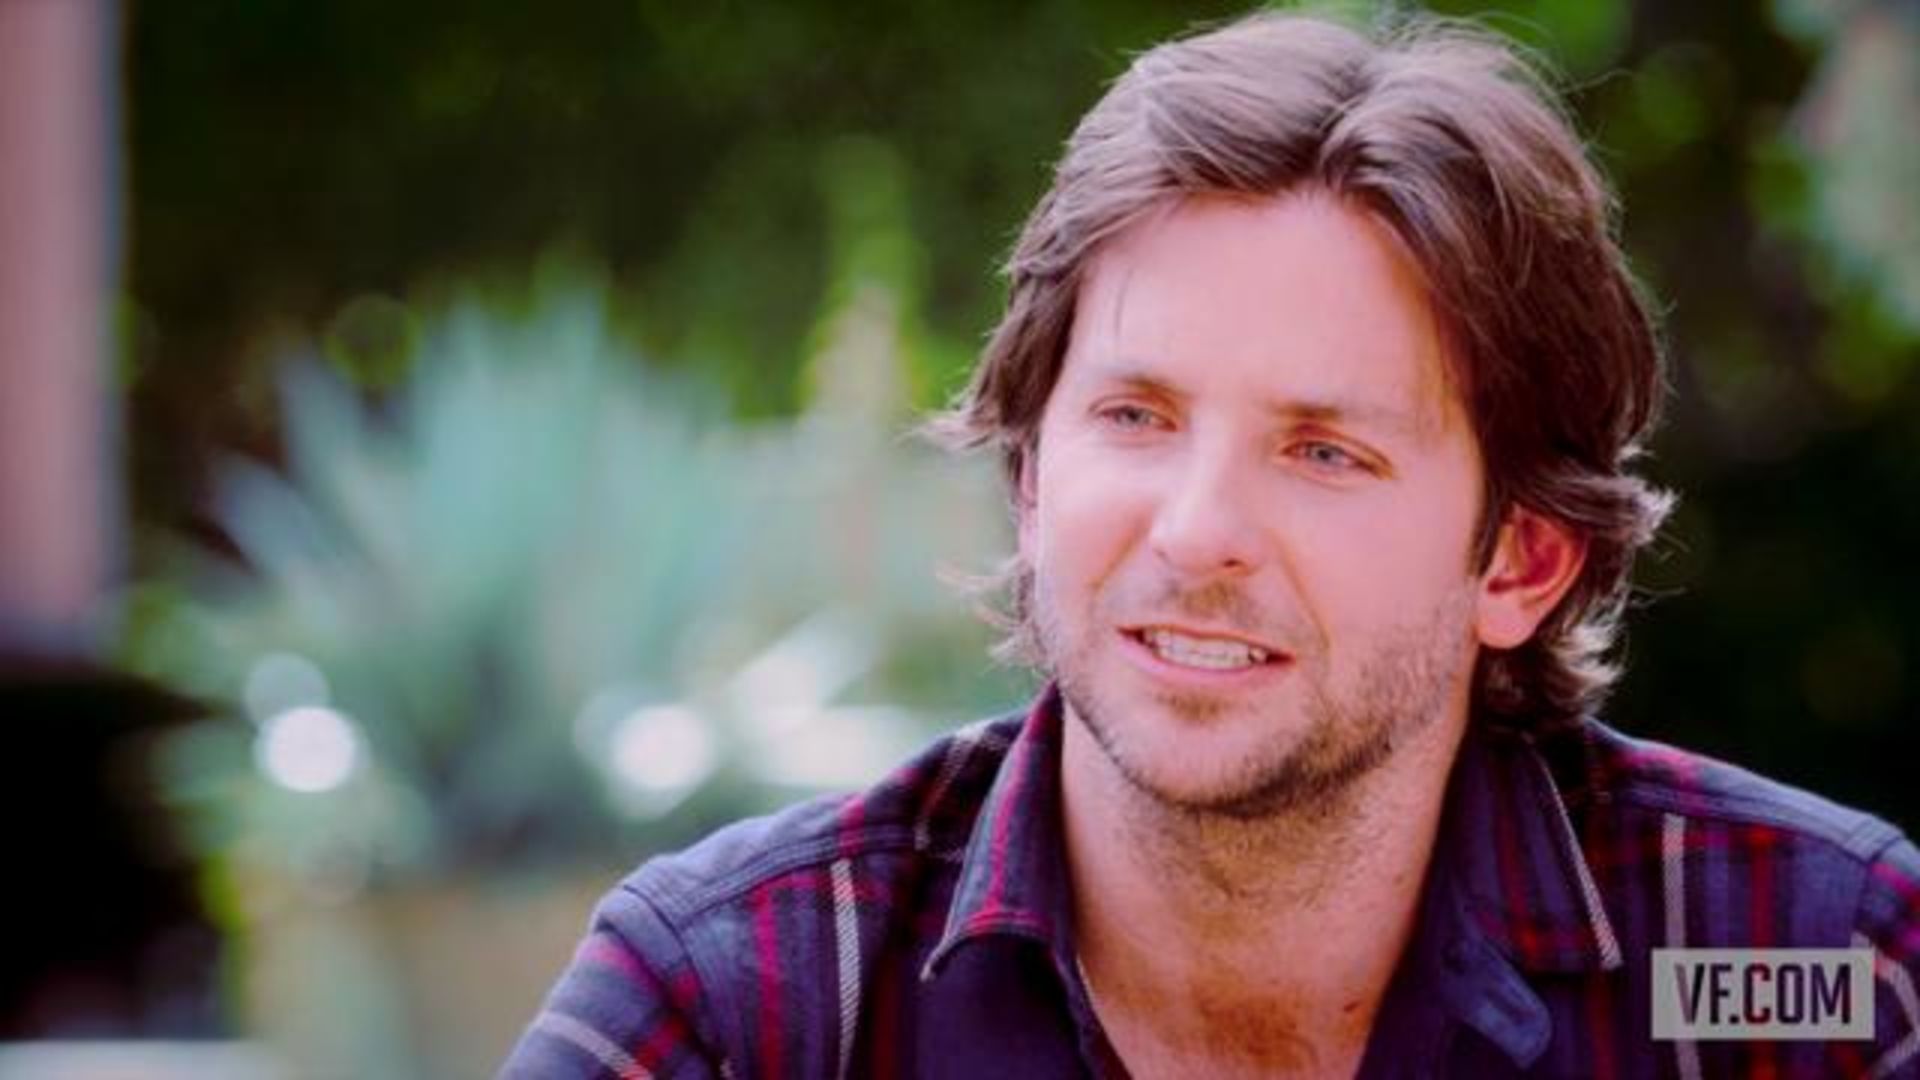 Bradley Cooper net worth: How much did he earn with The Hangover